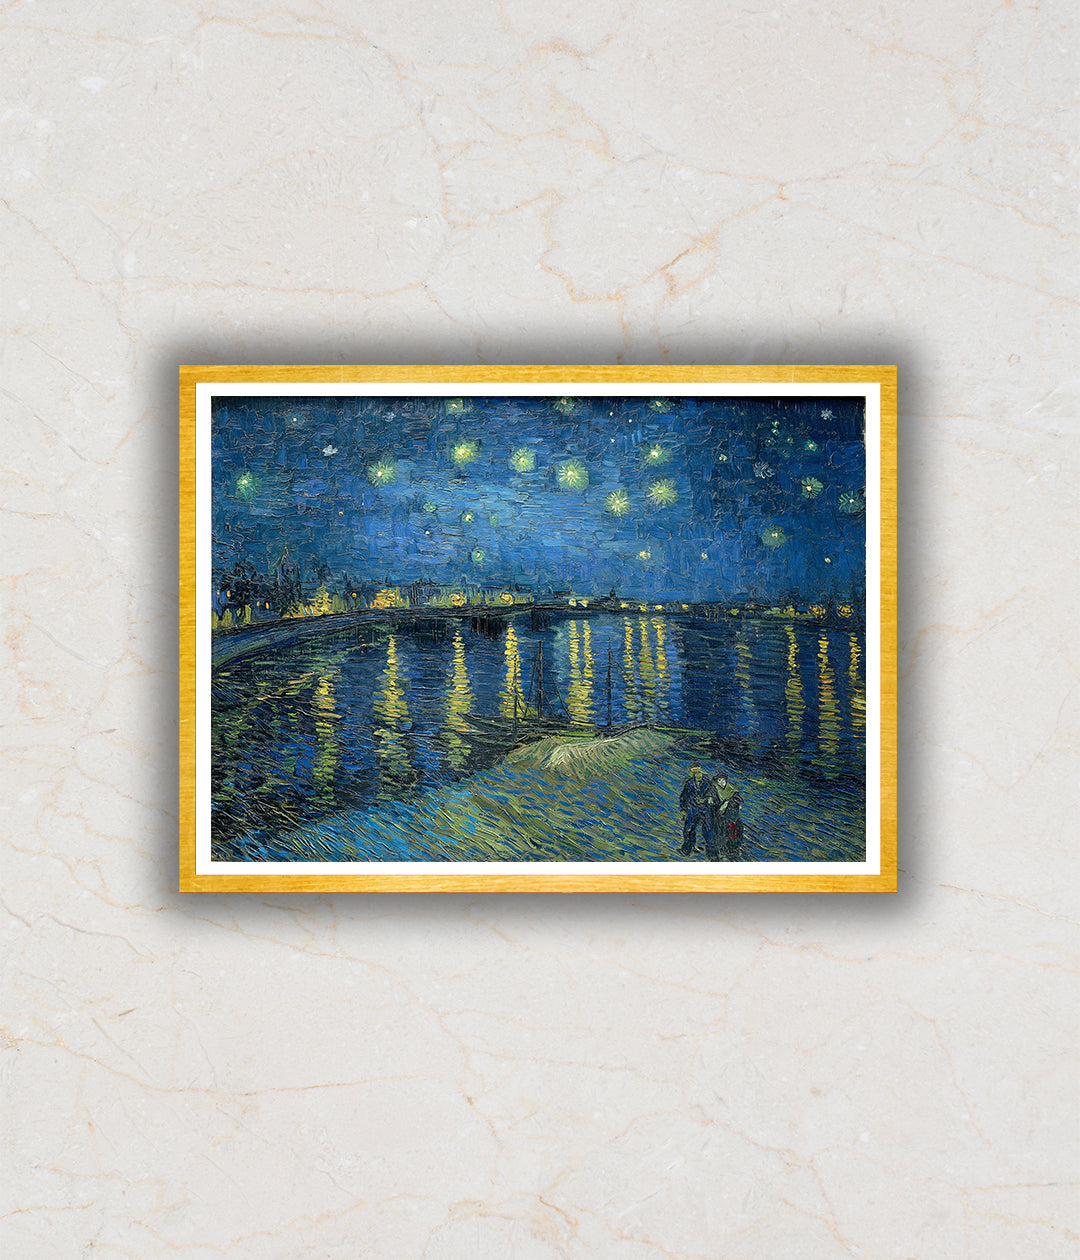 Starry Night Over the Rhone Artwork Painting For Home Wall Art D�_cor By Vincent Van Gogh